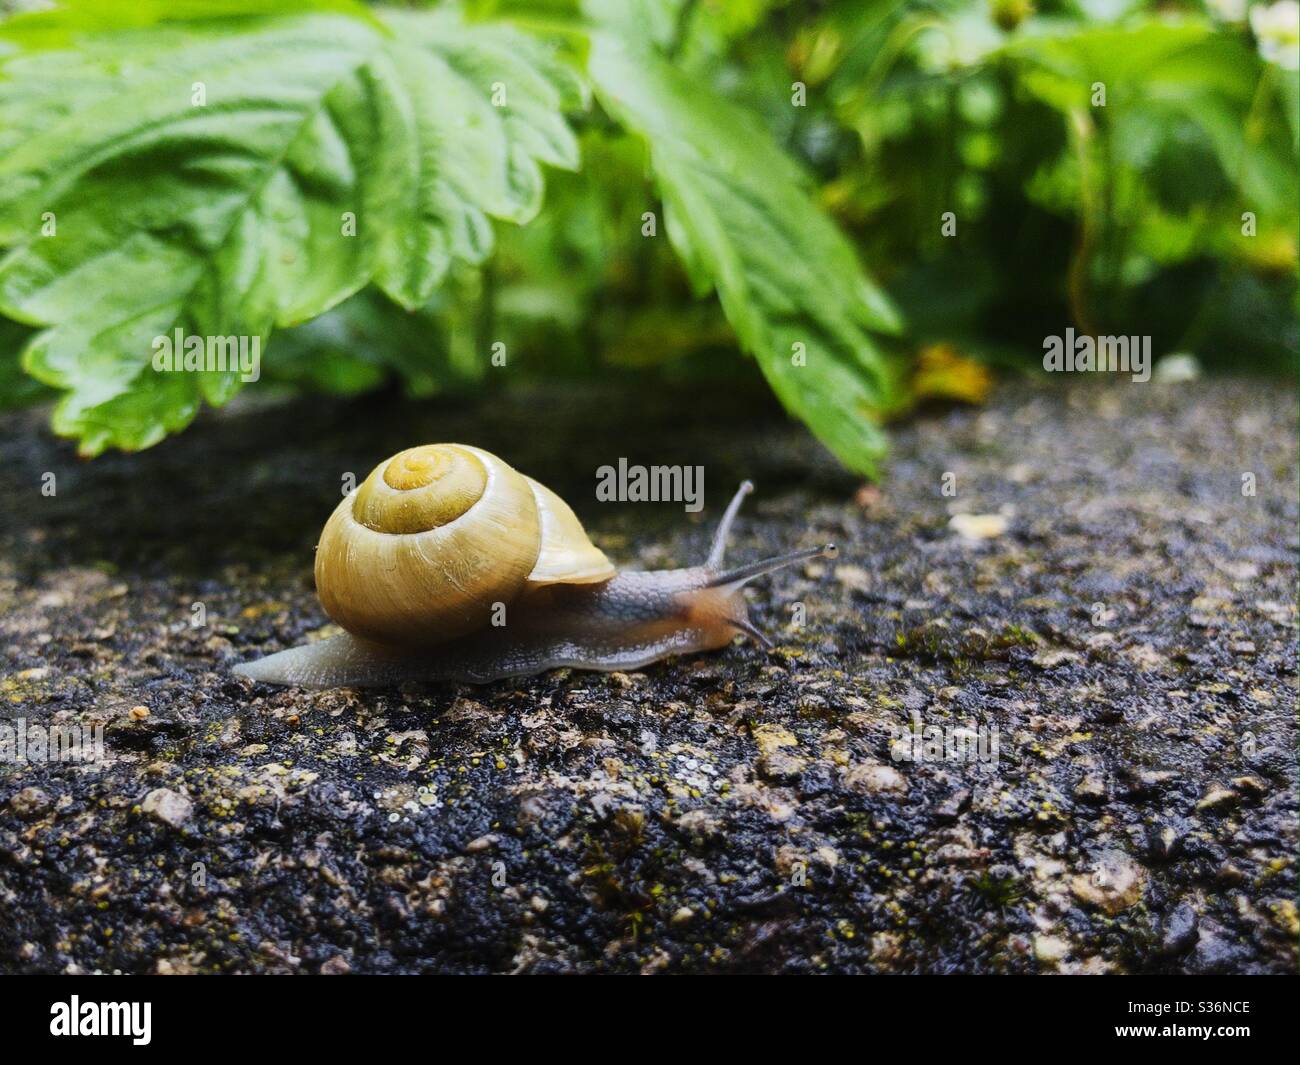 A grove snail on a concrete surface with leaves in the background Stock Photo